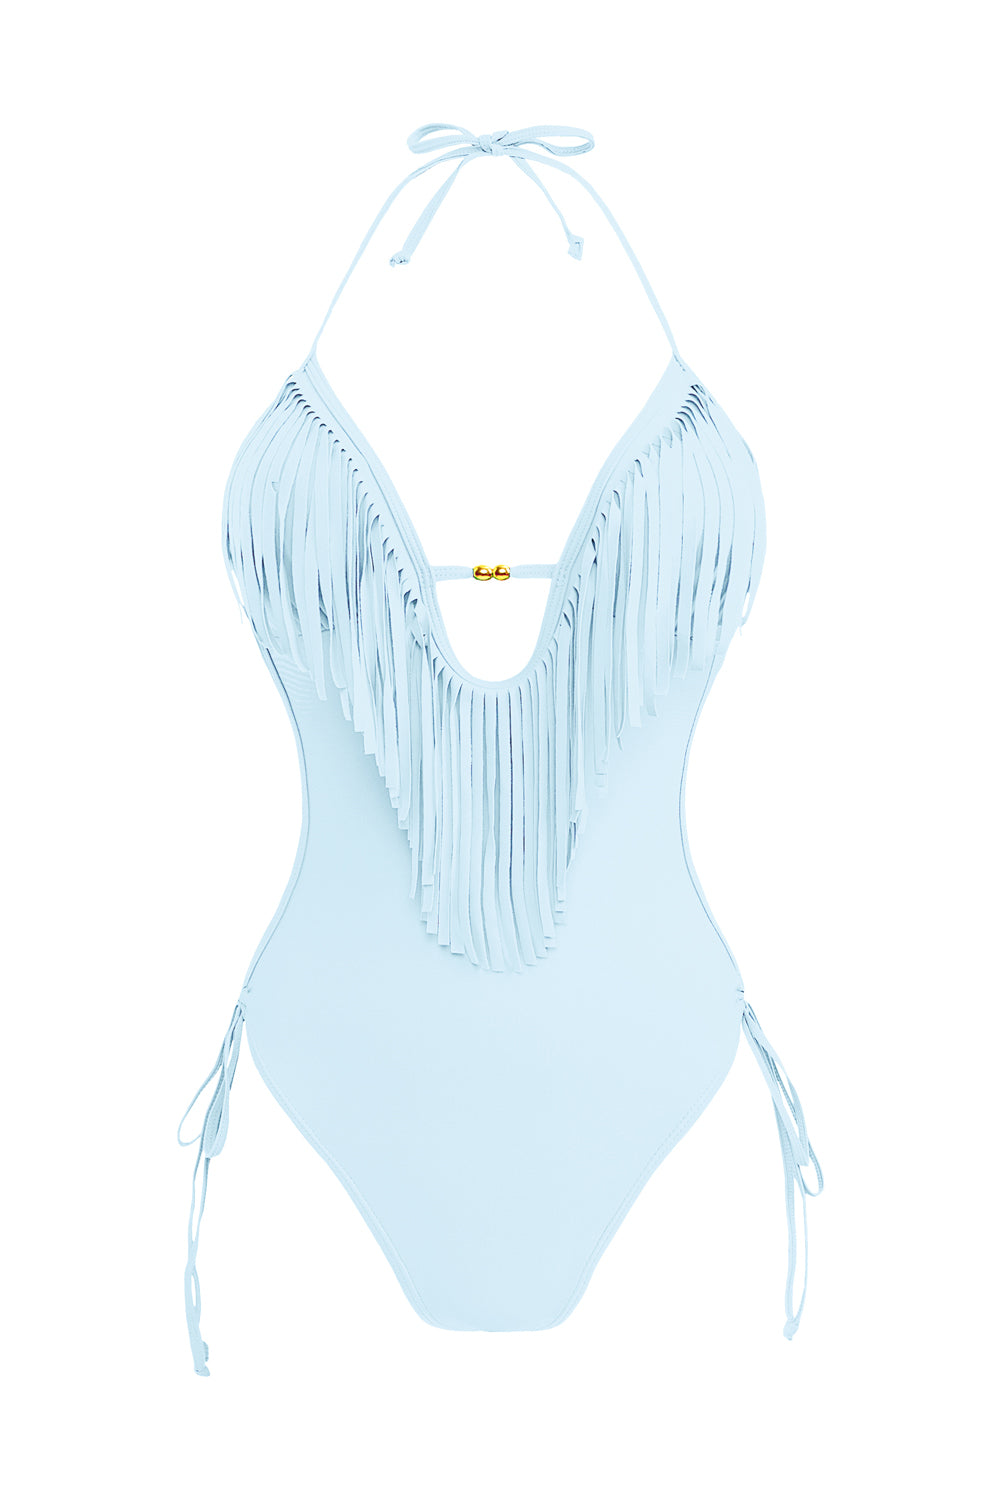 LC443432-4-S, LC443432-4-M, LC443432-4-L, LC443432-4-XL, LC443432-4-2XL, Sky Blue Tassel One Piece Swimsuits for Women Halter Backless Sexy Swimwear